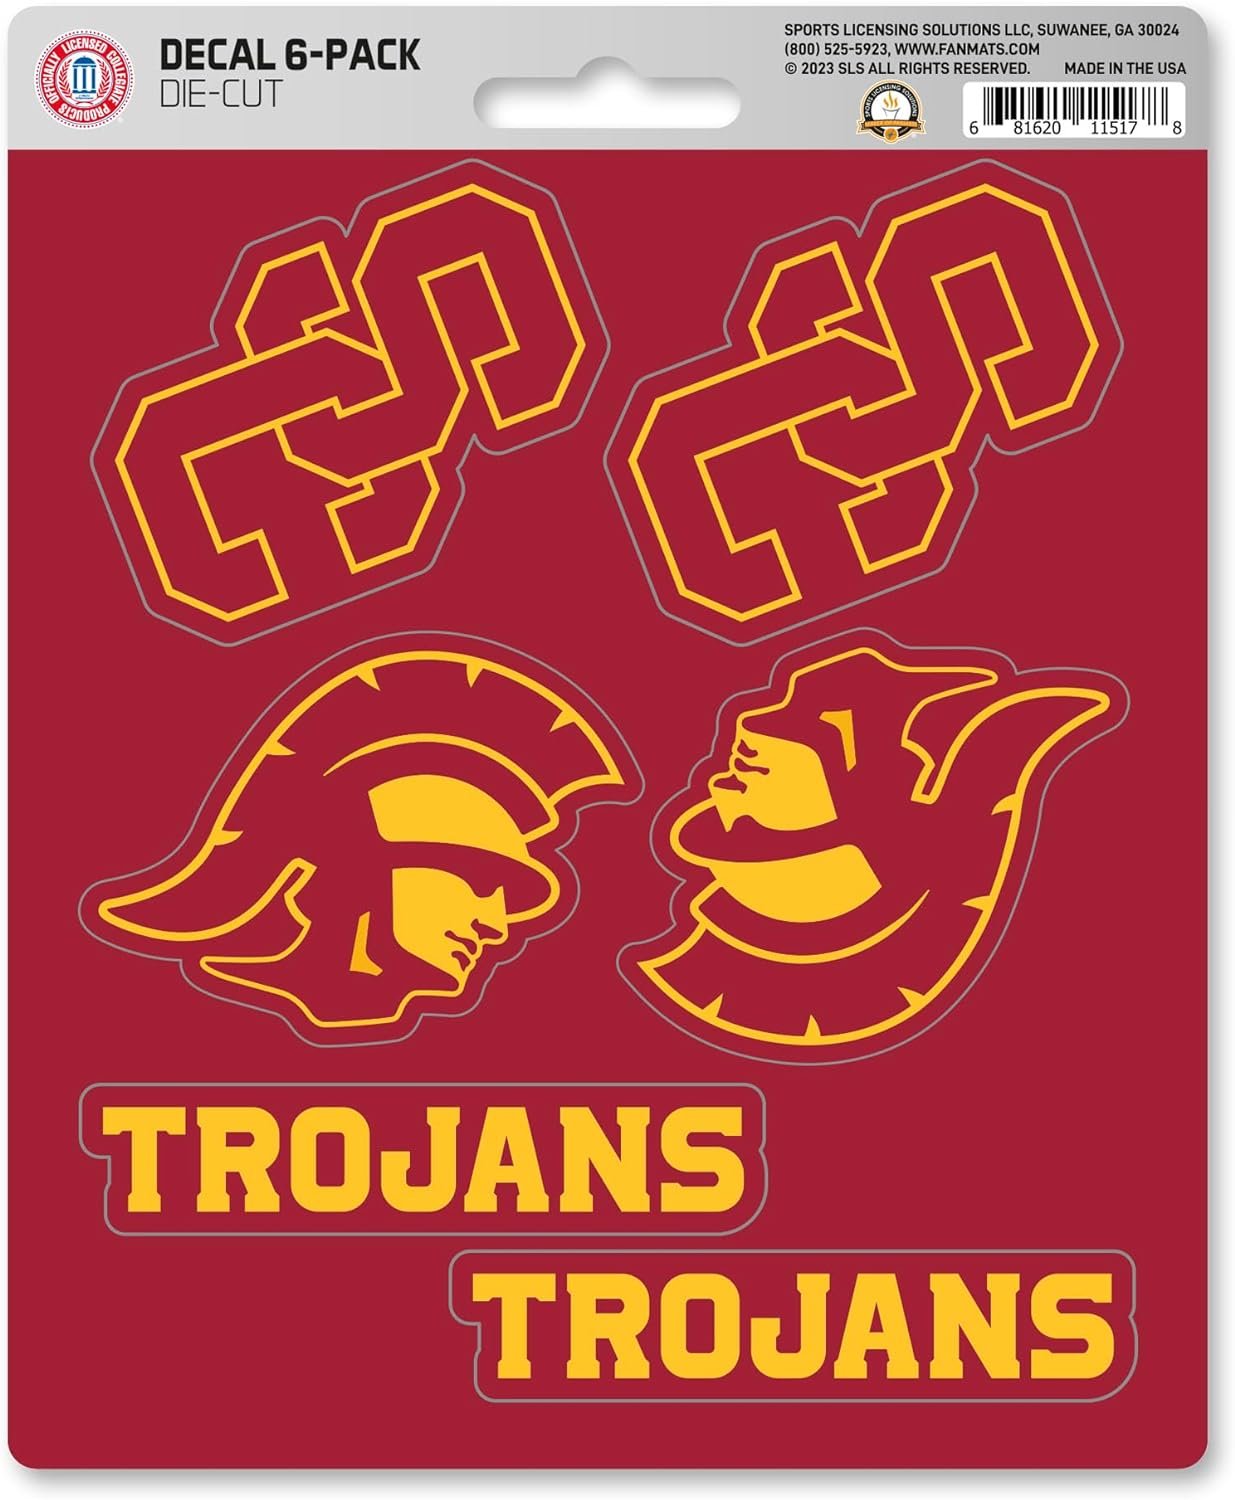 University of Southern California USC Trojans 6-Piece Decal Sticker Set, 5x6 Inch Sheet, Gift for football fans for any hard surfaces around home, automotive, personal items